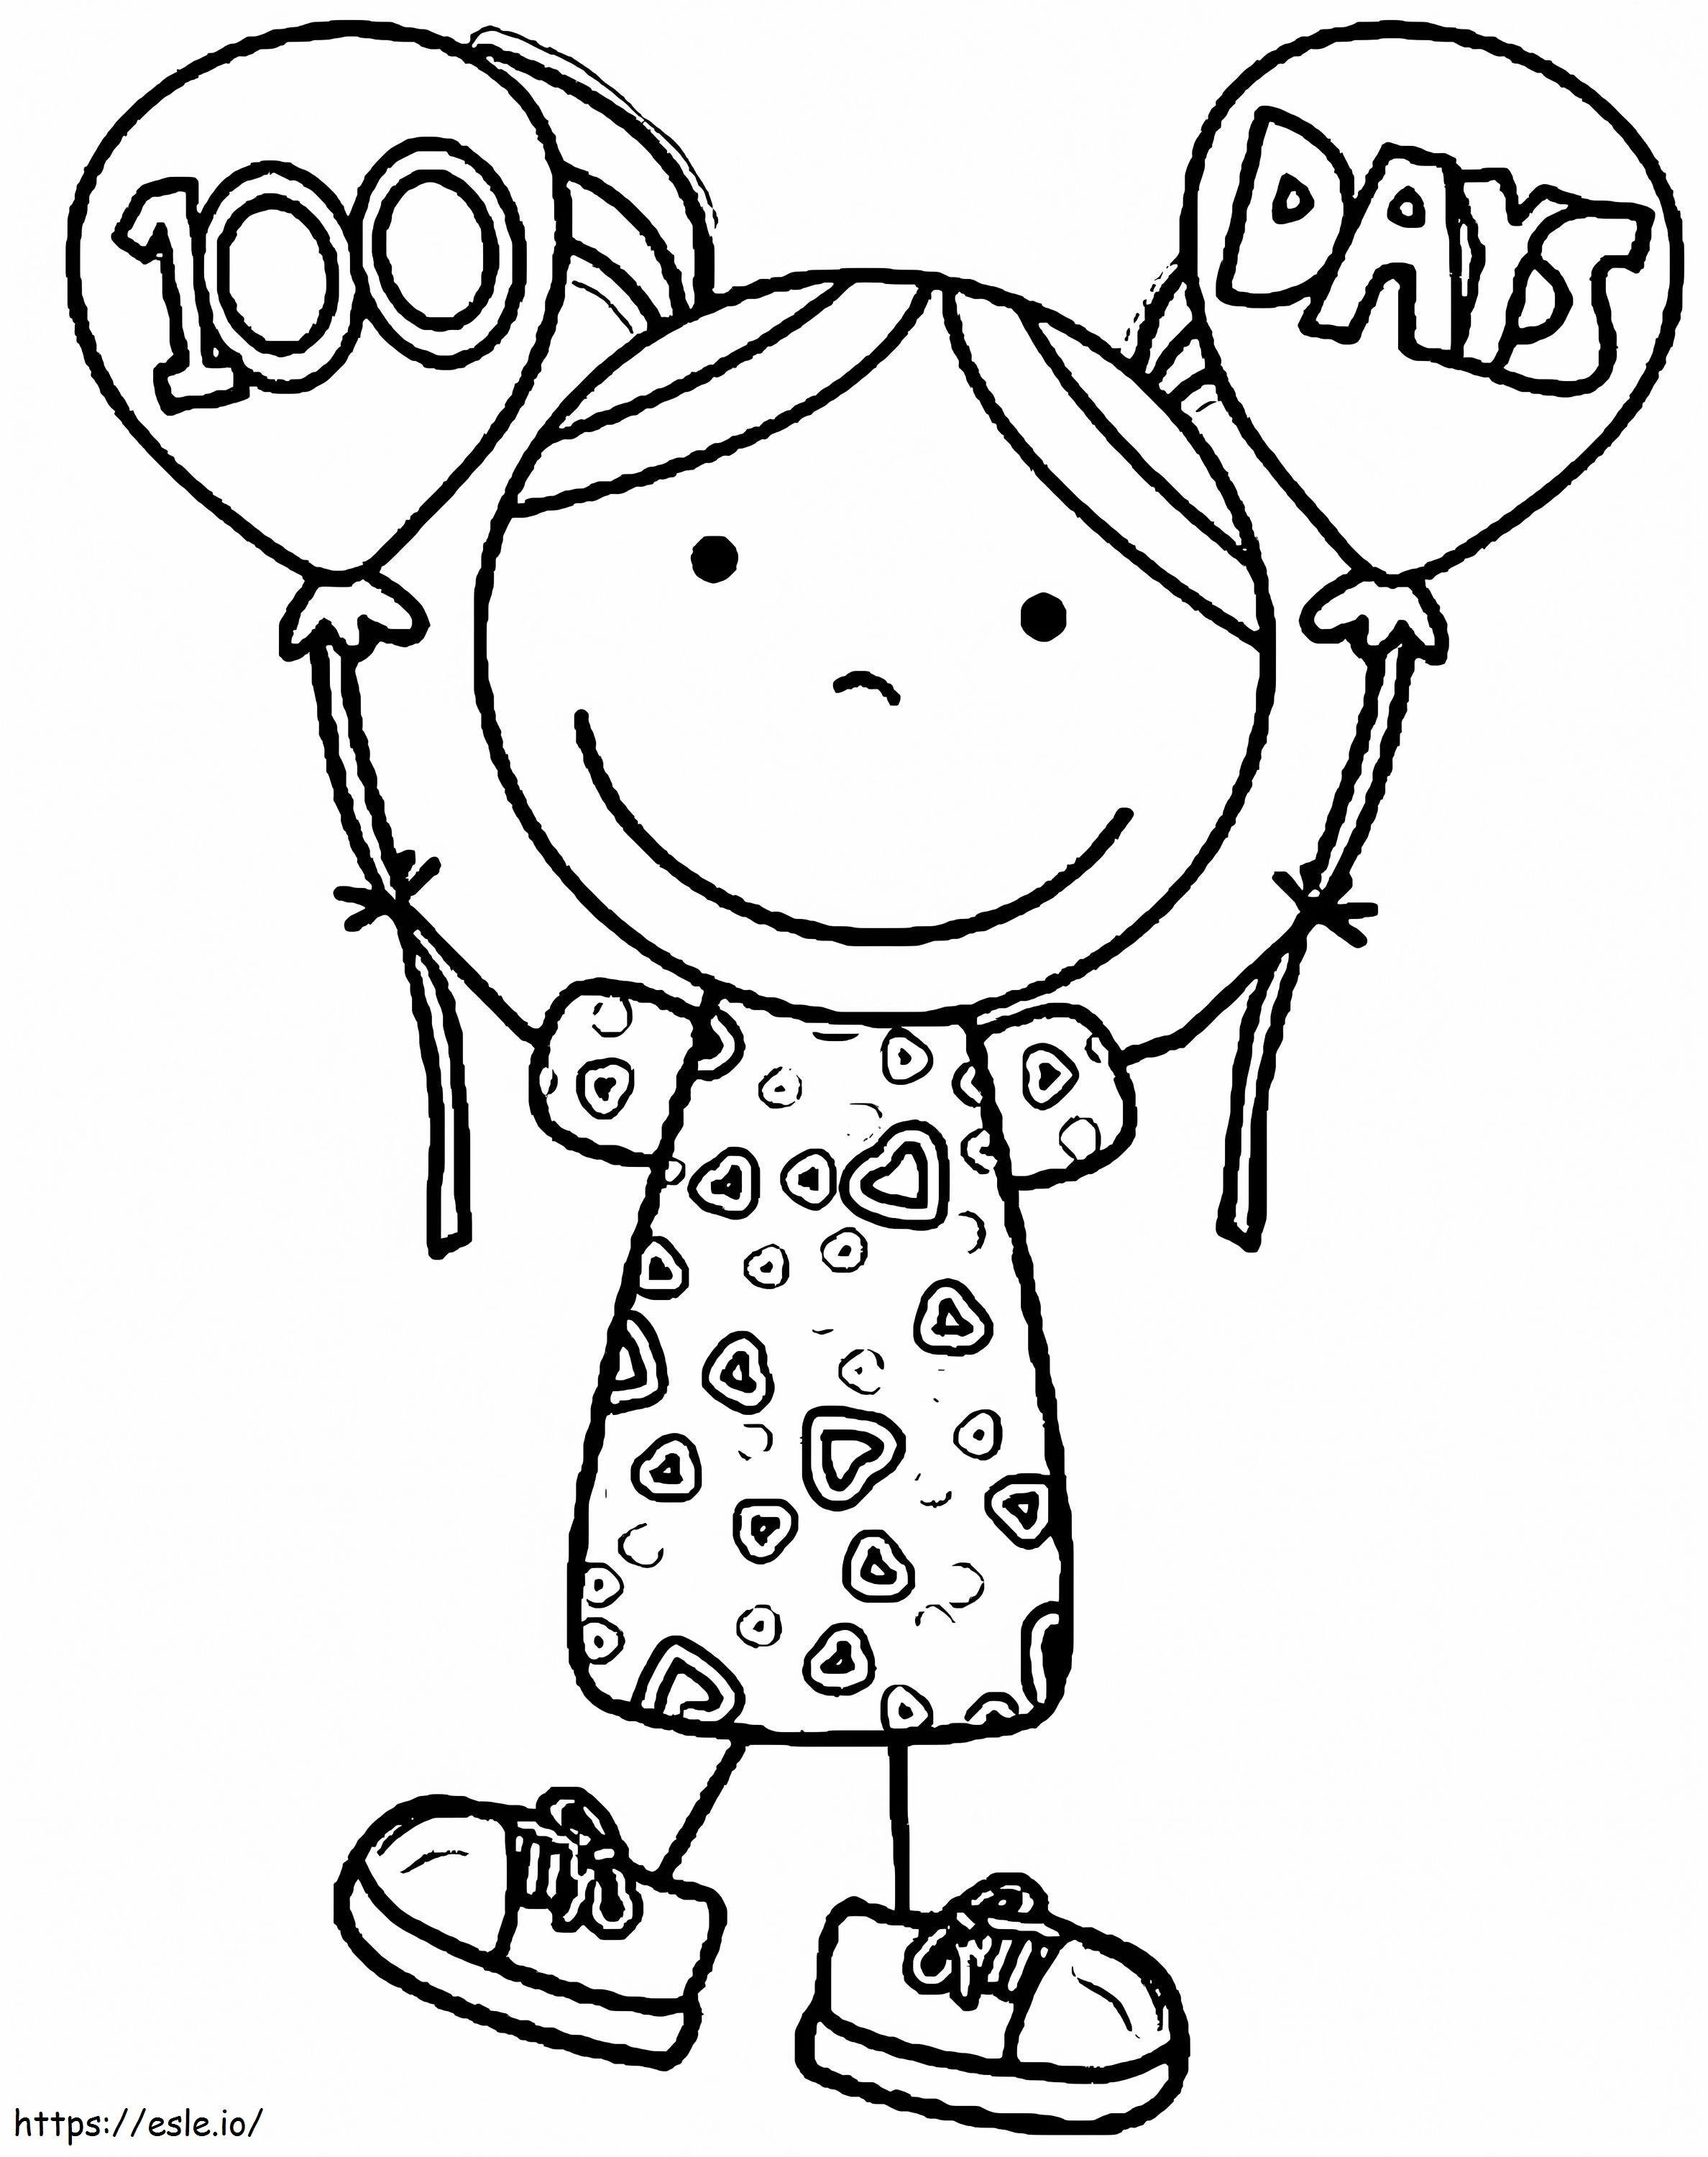 Printable 100 Days Of School coloring page